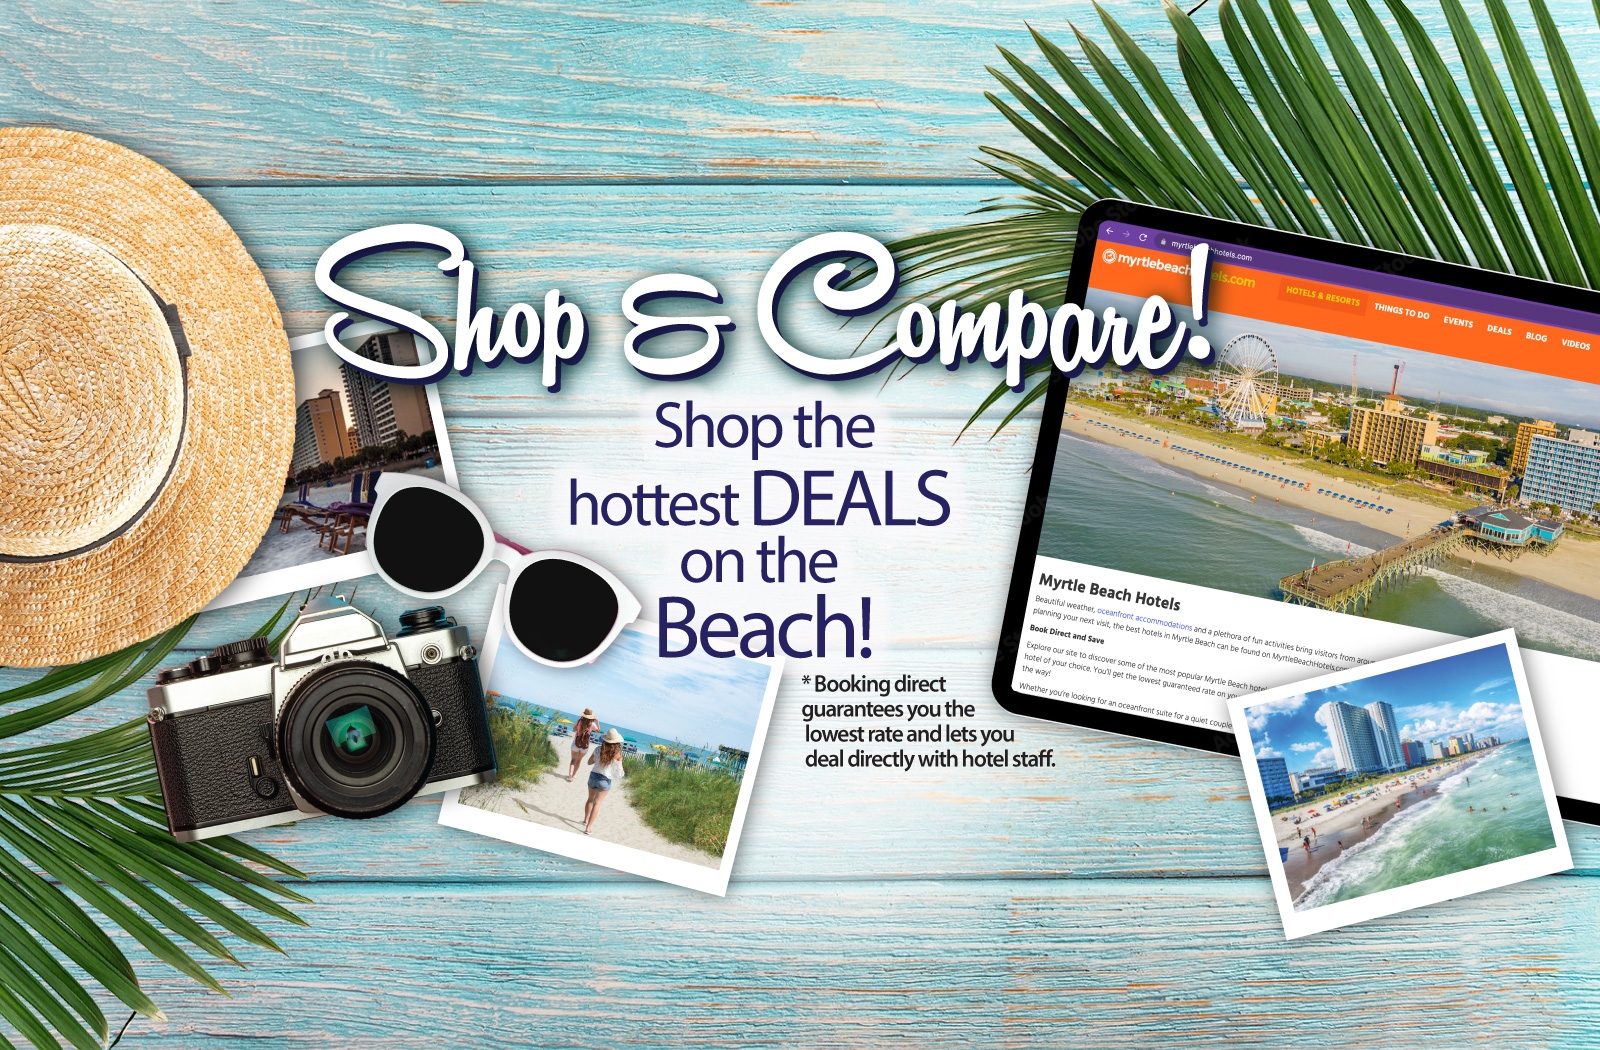 Myrtle Beach Hotels - Shop & Compare! Shop the hottest deals on the Beach! Booking direct guarantees you the lowest rate and lets you deal directly with hotel staff.